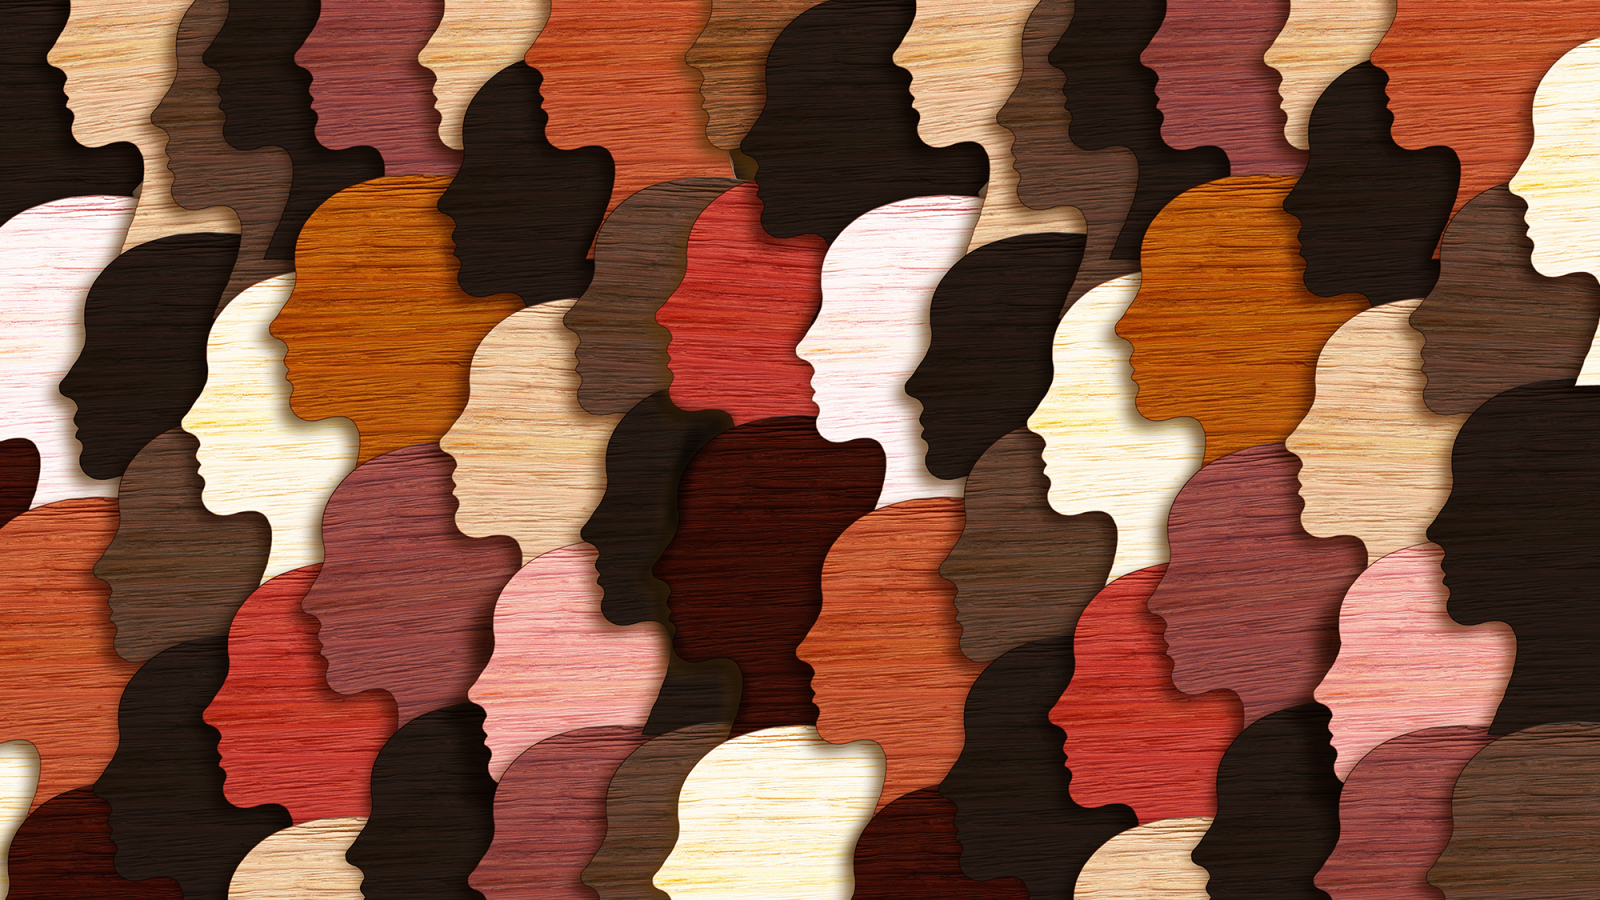 Repeating graphic of profiles with different color skin tones